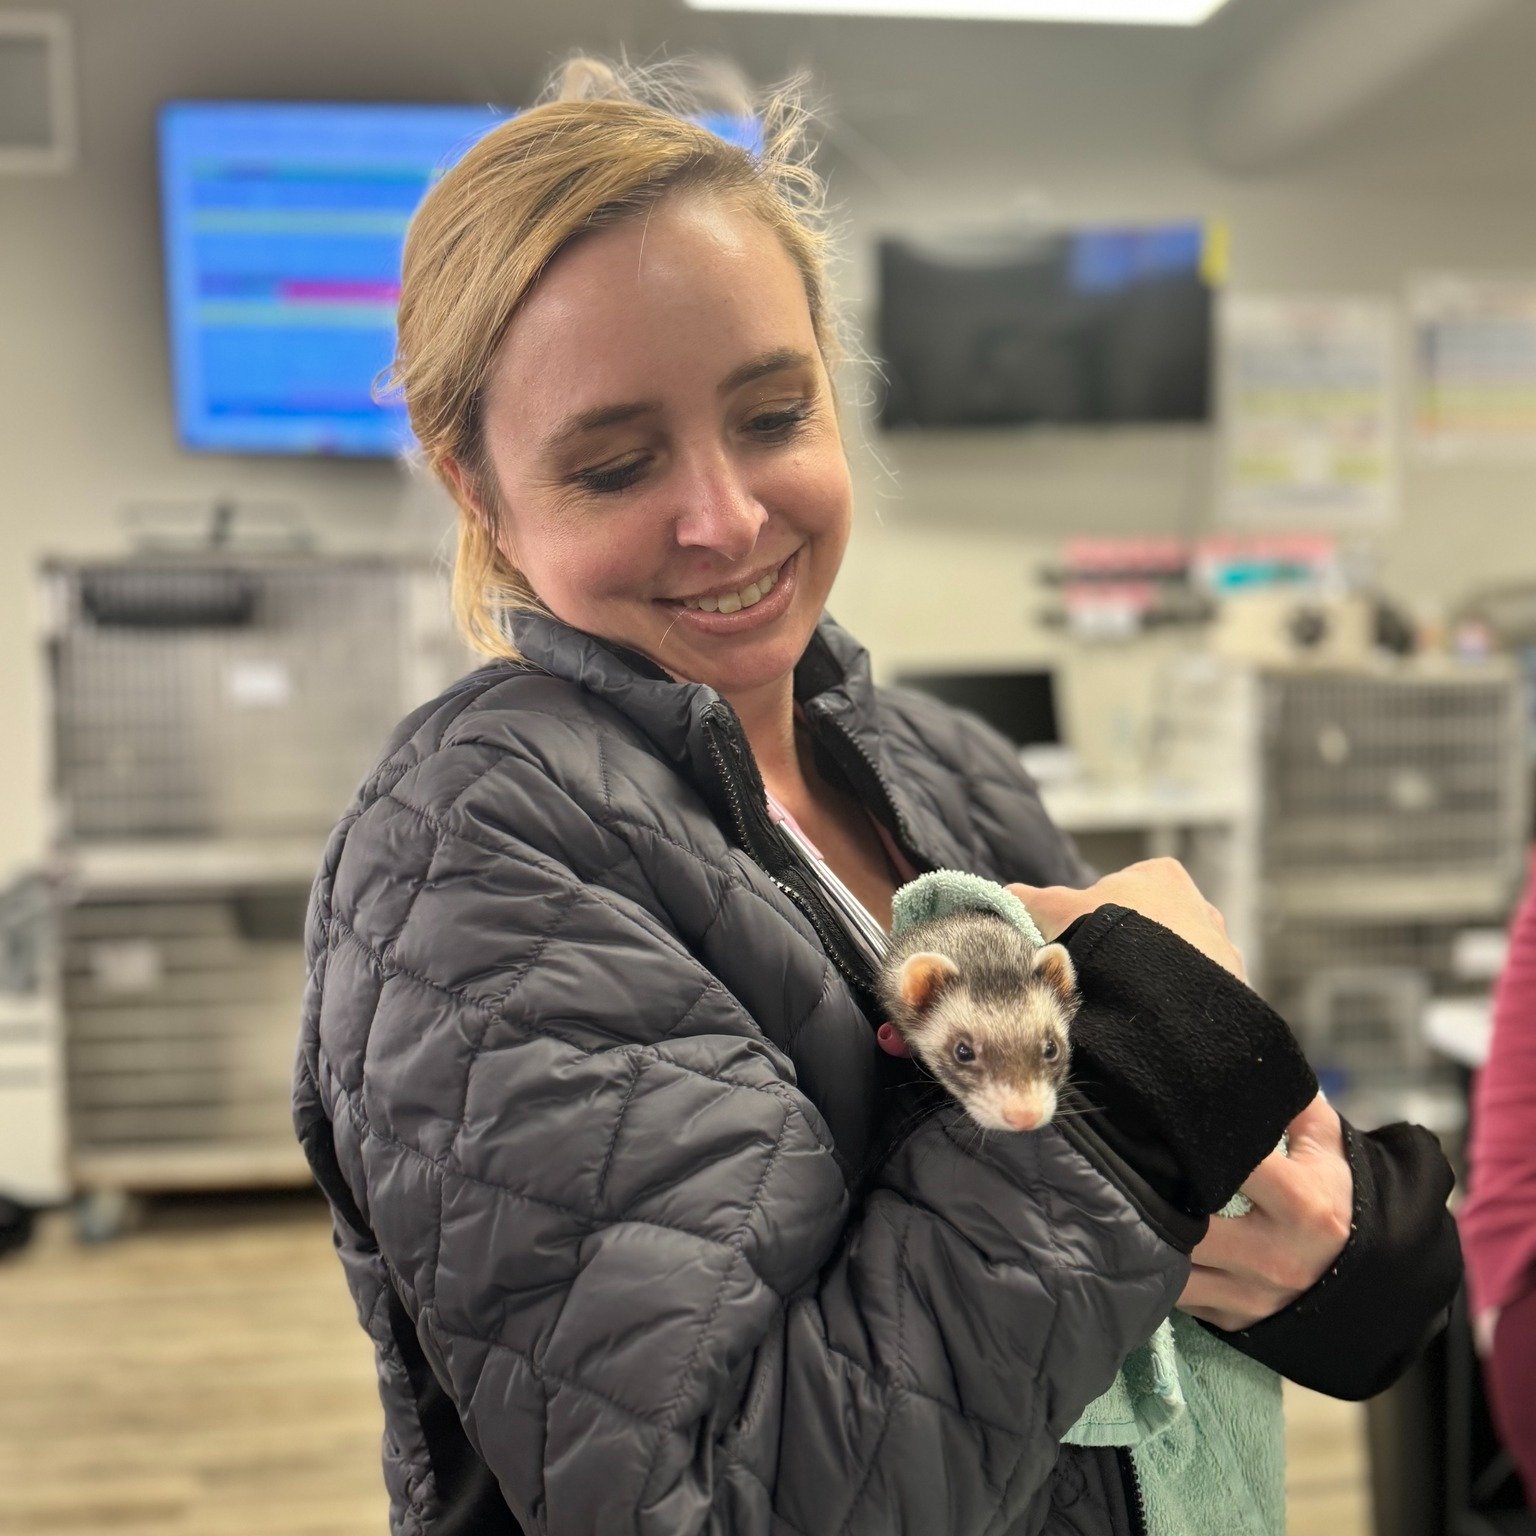 🐾 Meet this adorable patient, Little One, the 7-year-old ferret! 🐾

Little One stole our hearts from the moment she scampered into our clinic! With those playful antics and curious whiskers, she bring joy to everyone they meet. 😍

Though Little On